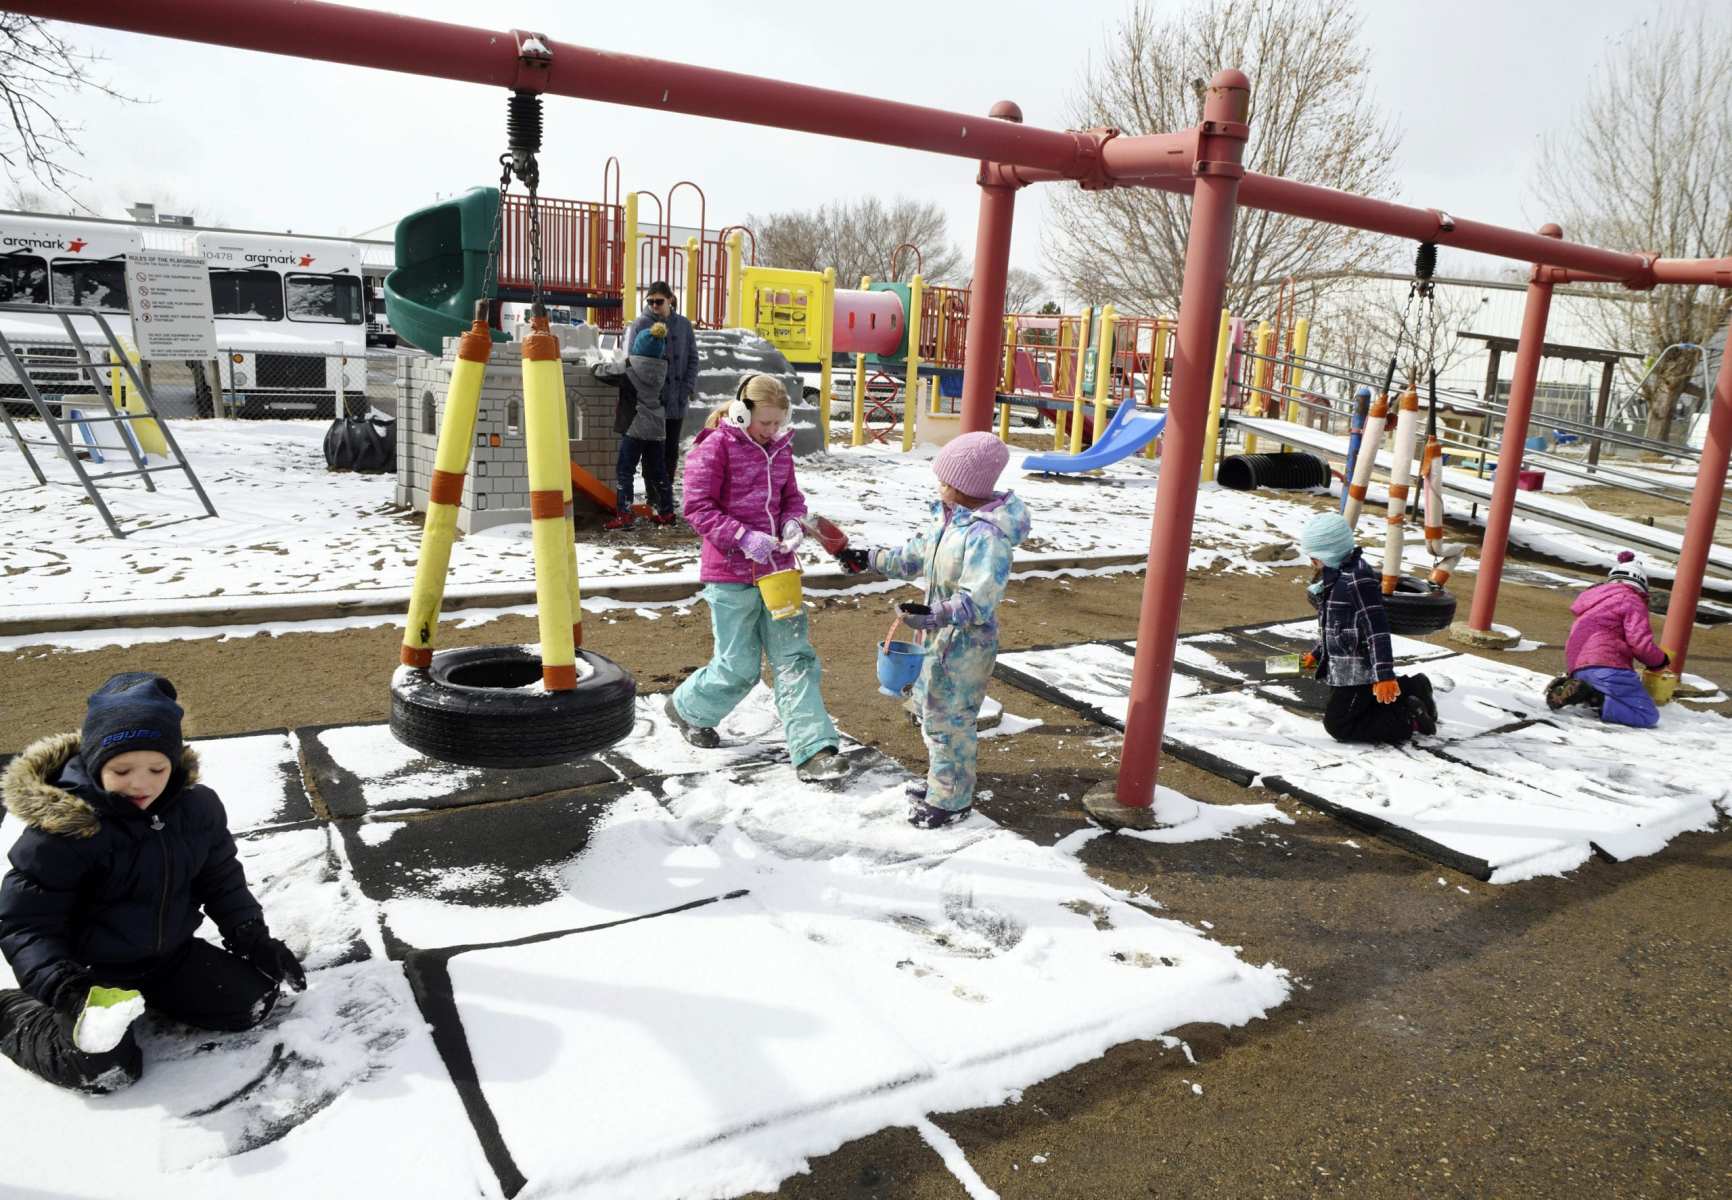 Children playing on a swing set with snow on the ground.